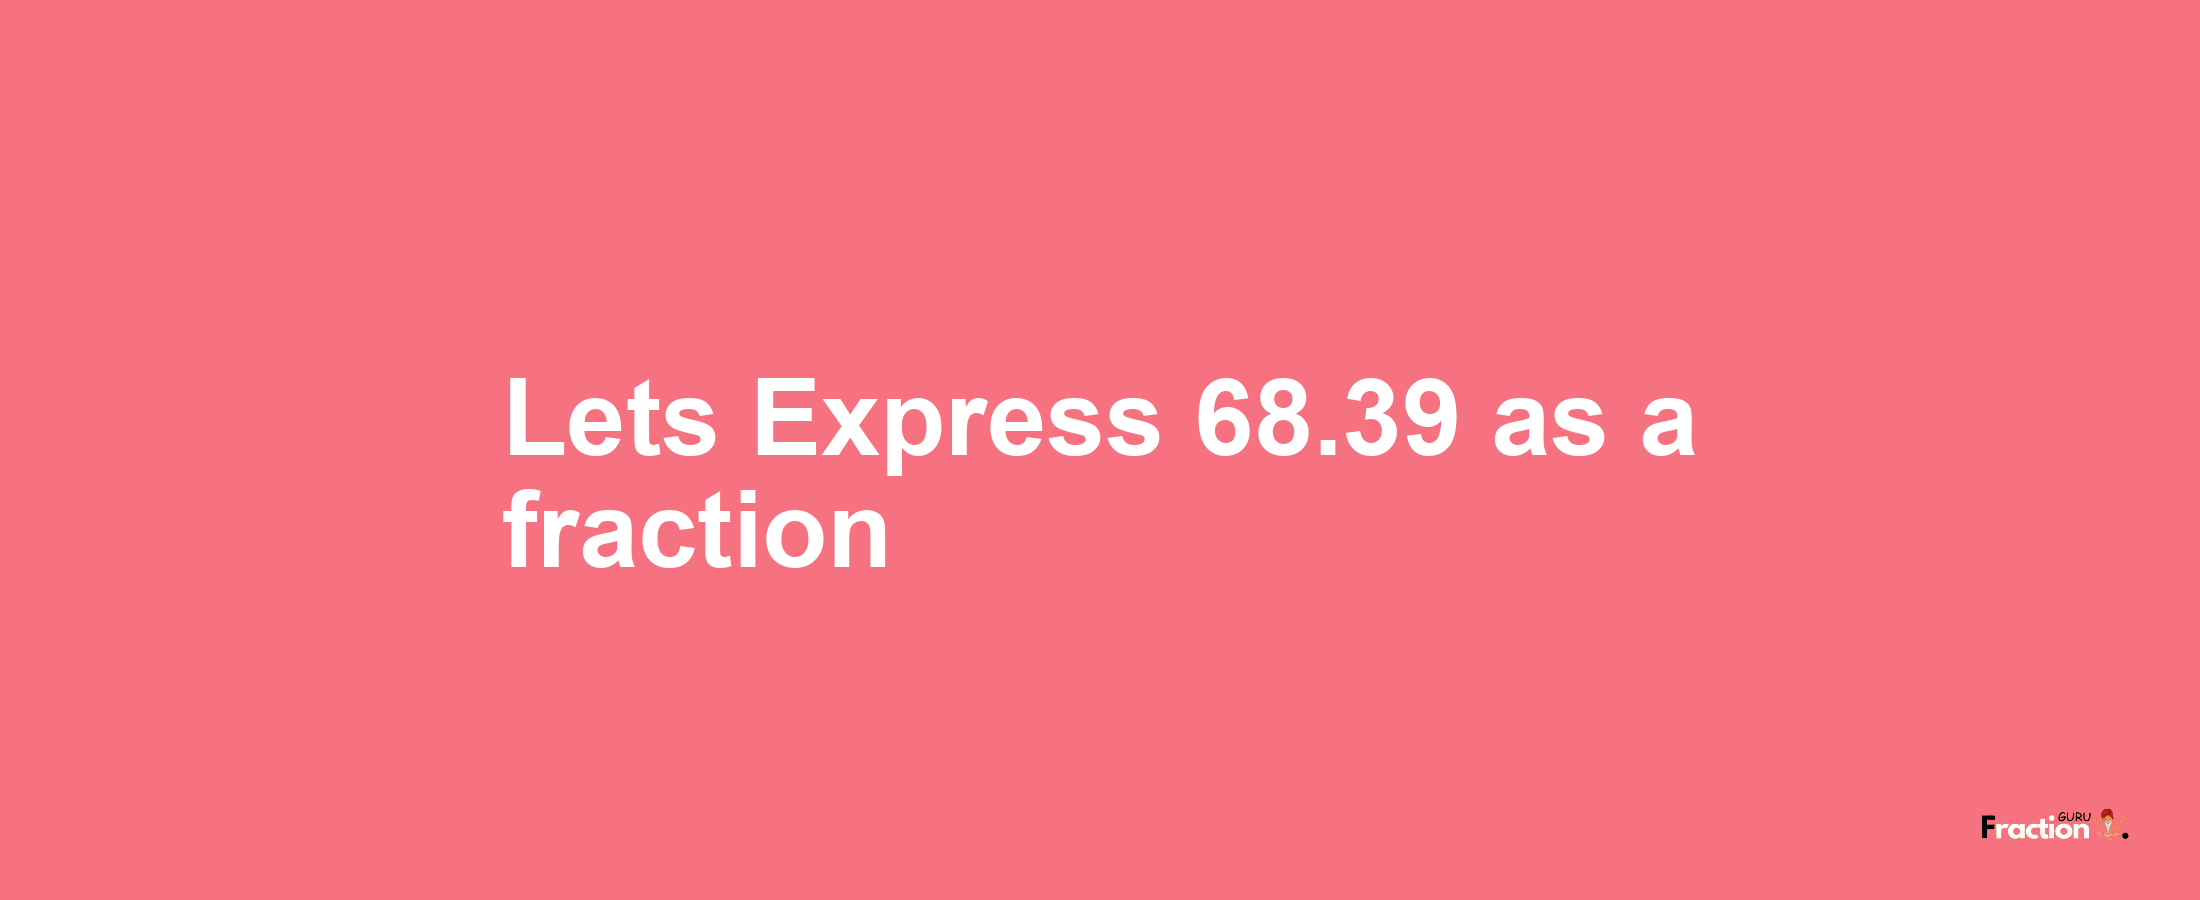 Lets Express 68.39 as afraction